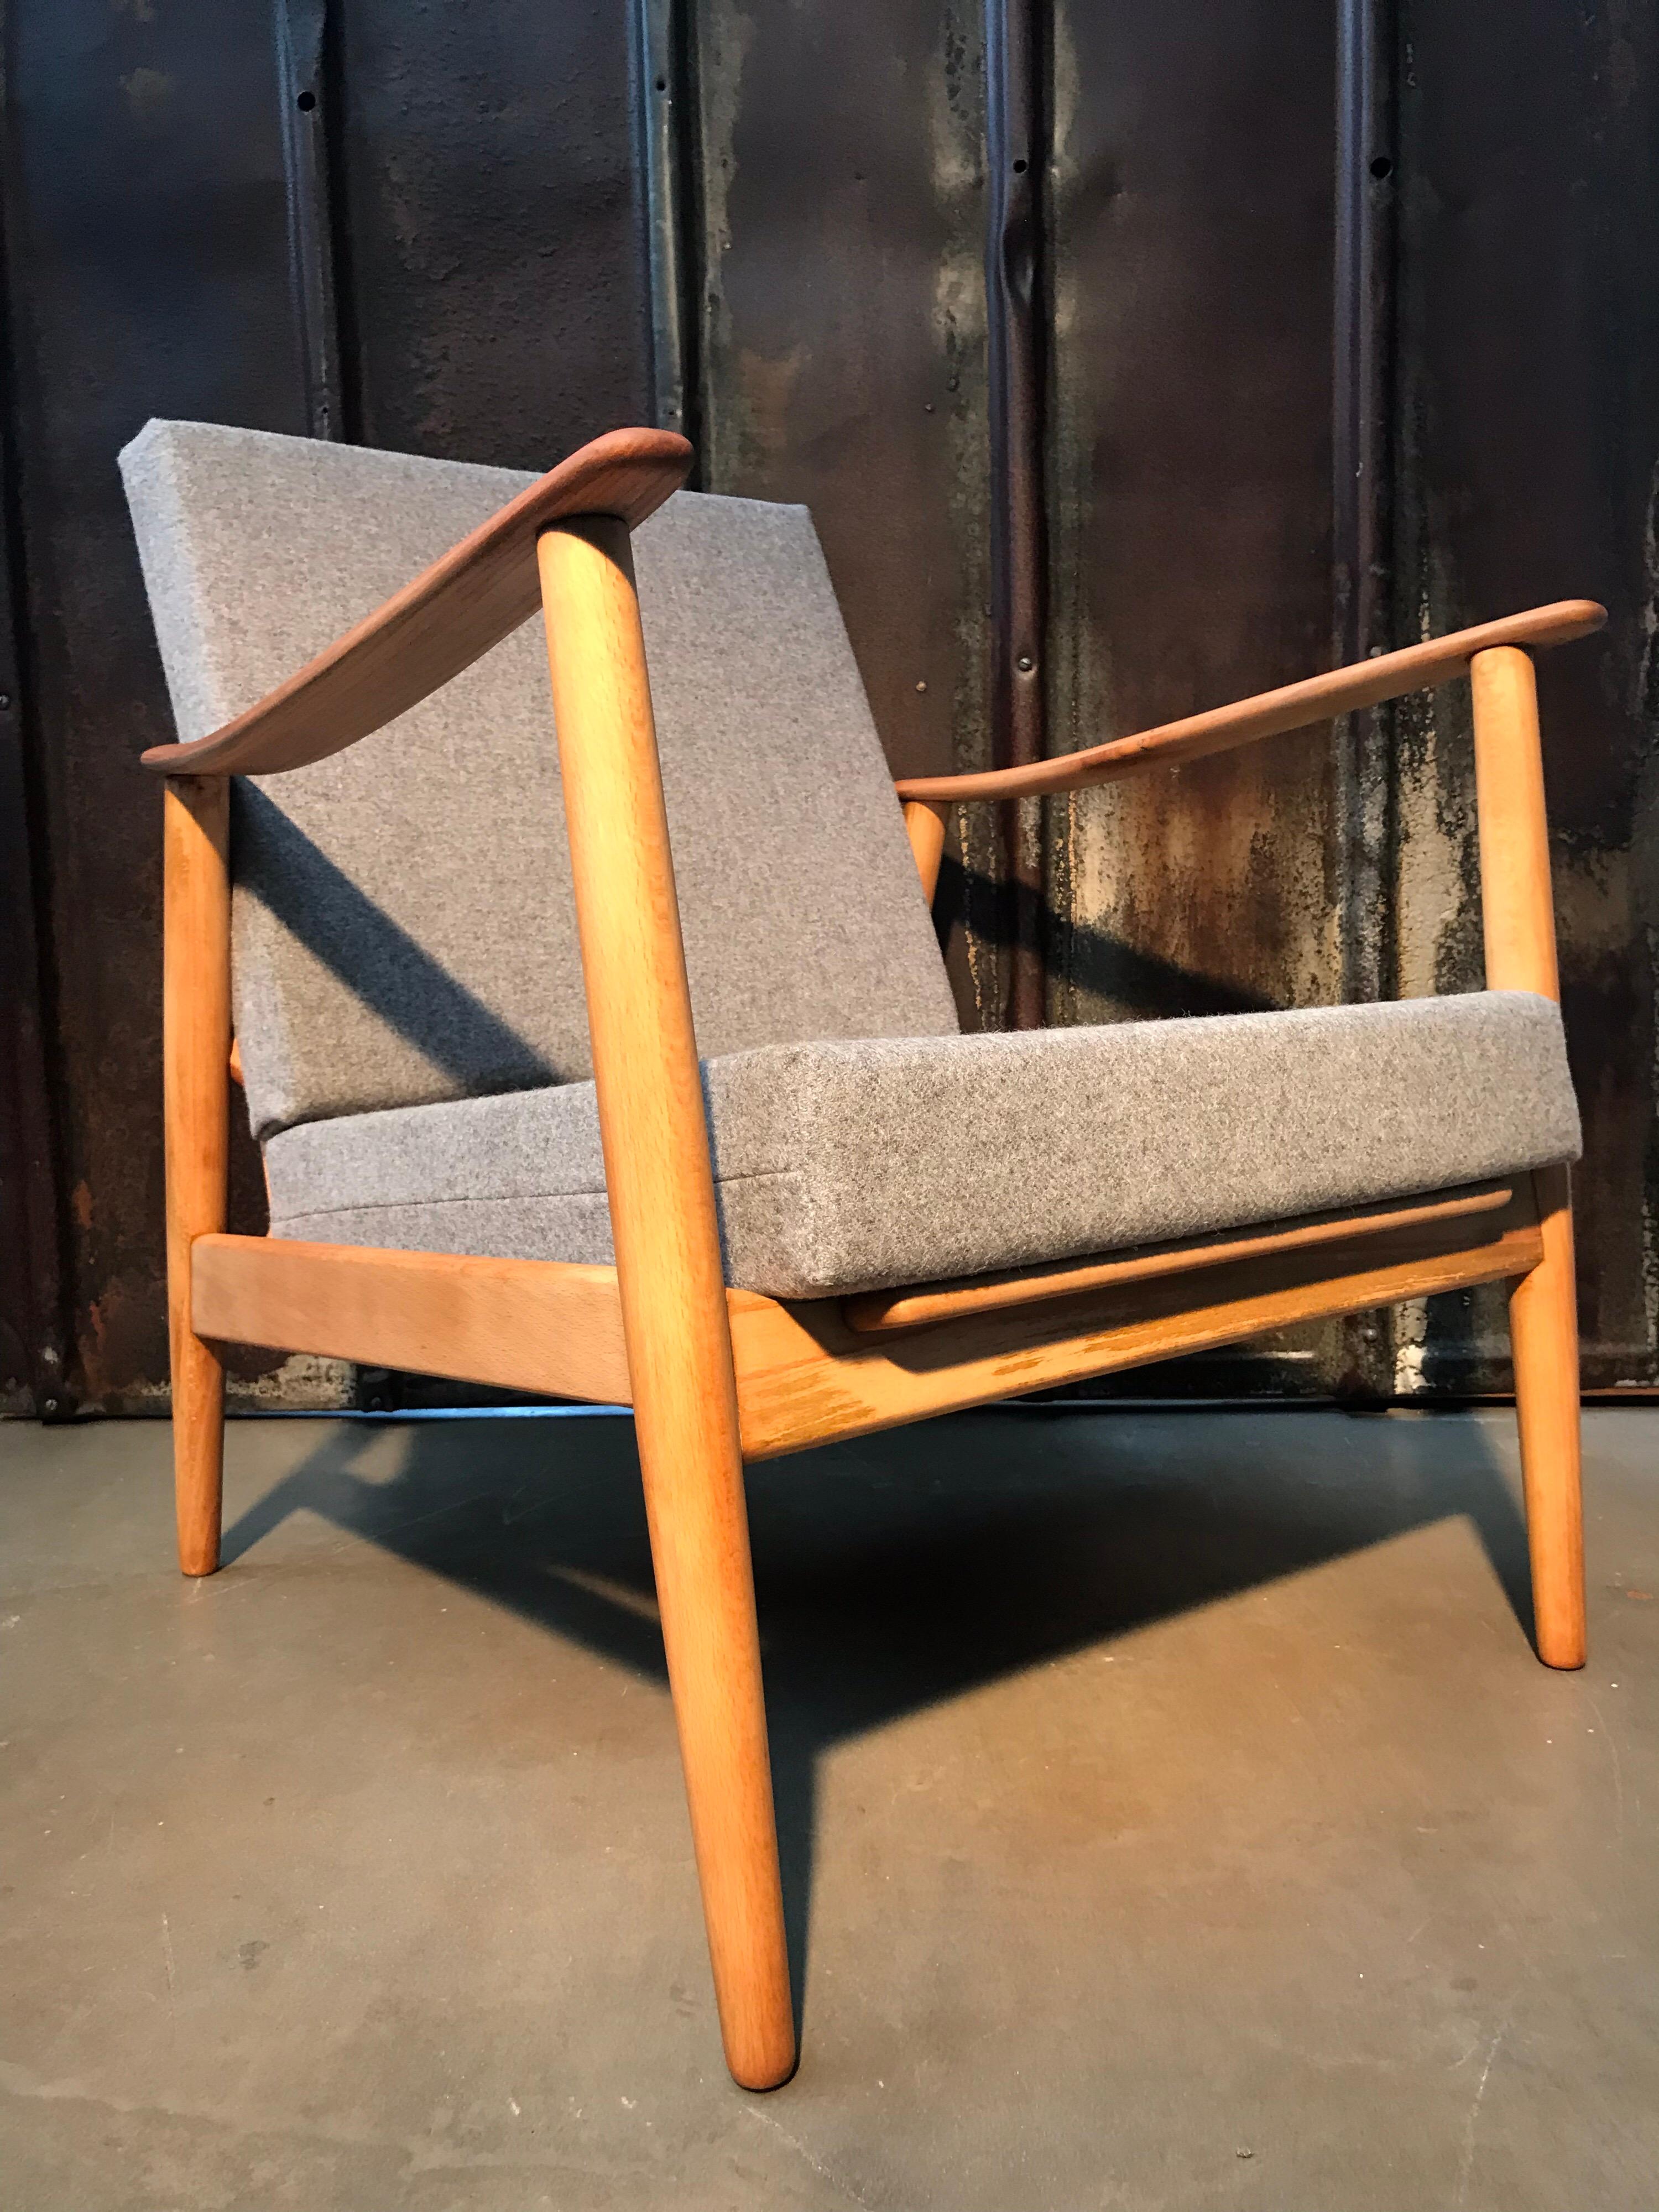 Vintage Danish Mid-Century Modern easy lounge chair in beech wood. 
This chair has been totally refurbished and with new foam and covers in 100% New Zealand lambs wool.
The beech wood has had all the old dark varnish removed by sanding and been